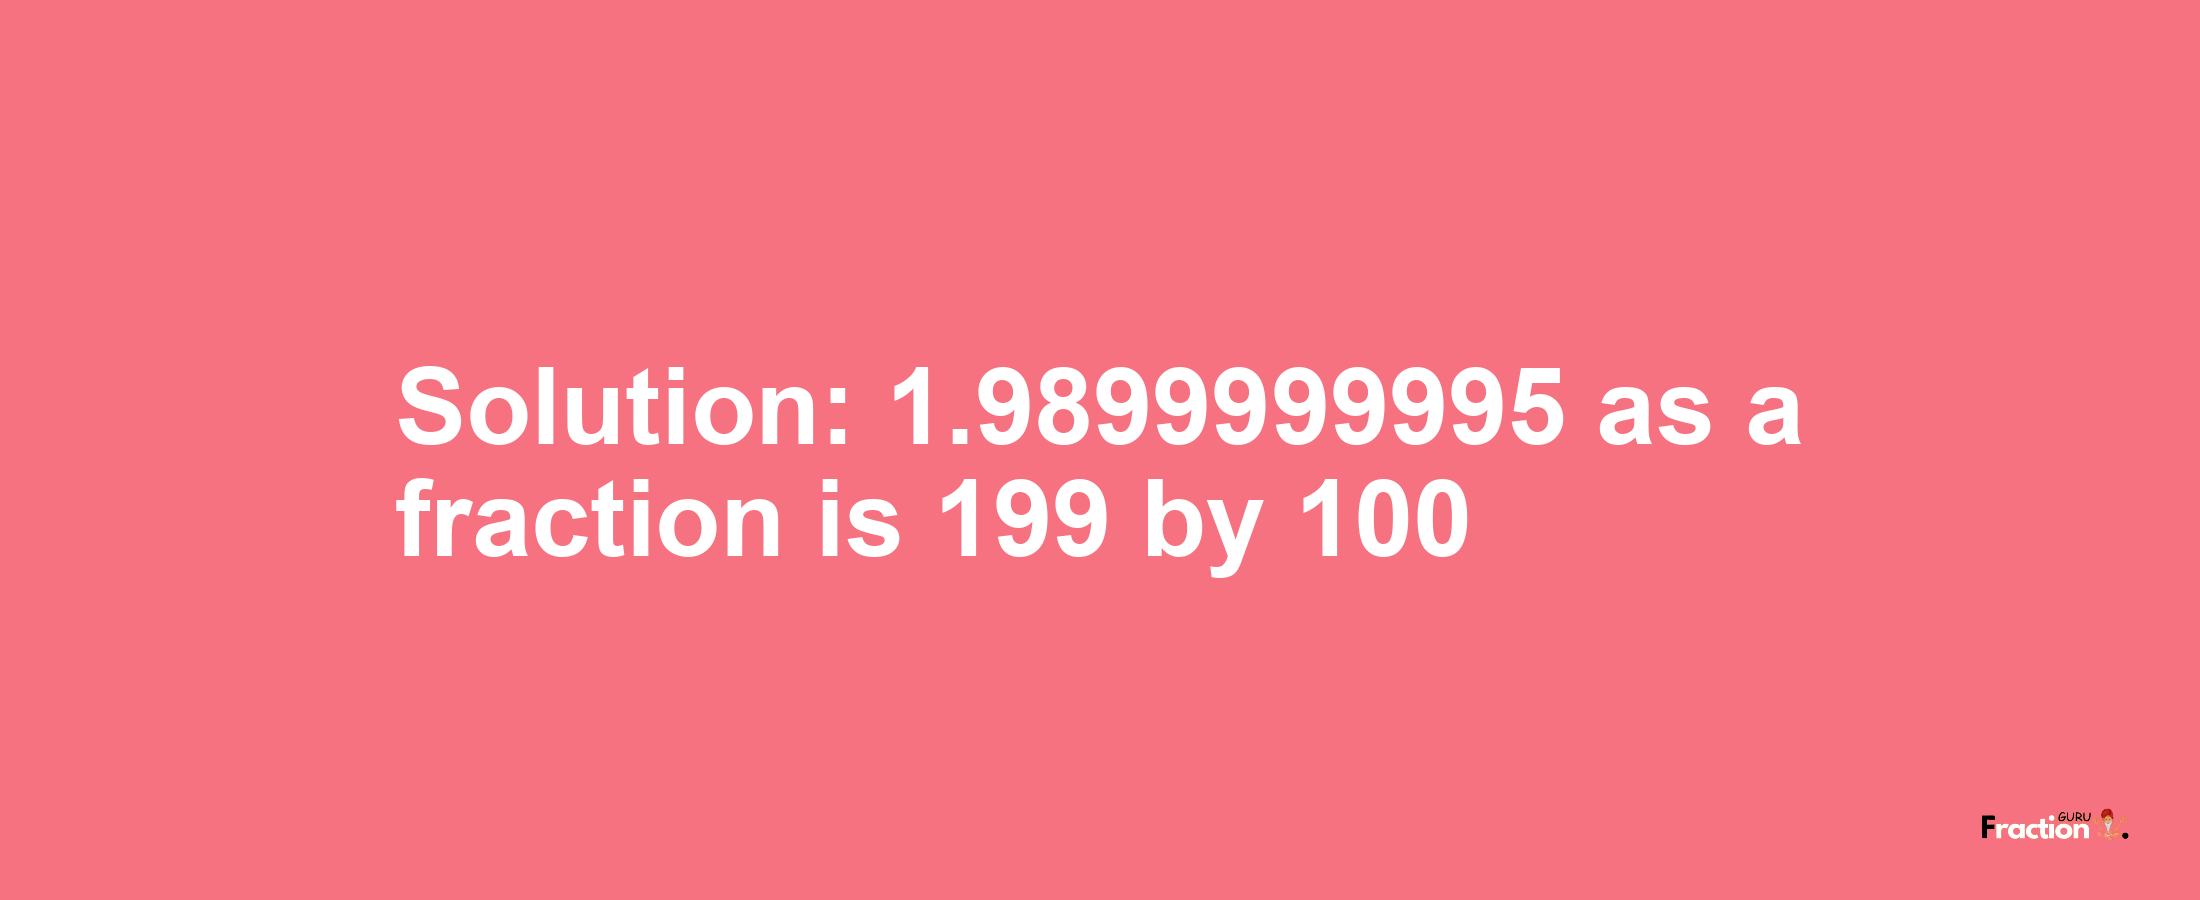 Solution:1.9899999995 as a fraction is 199/100